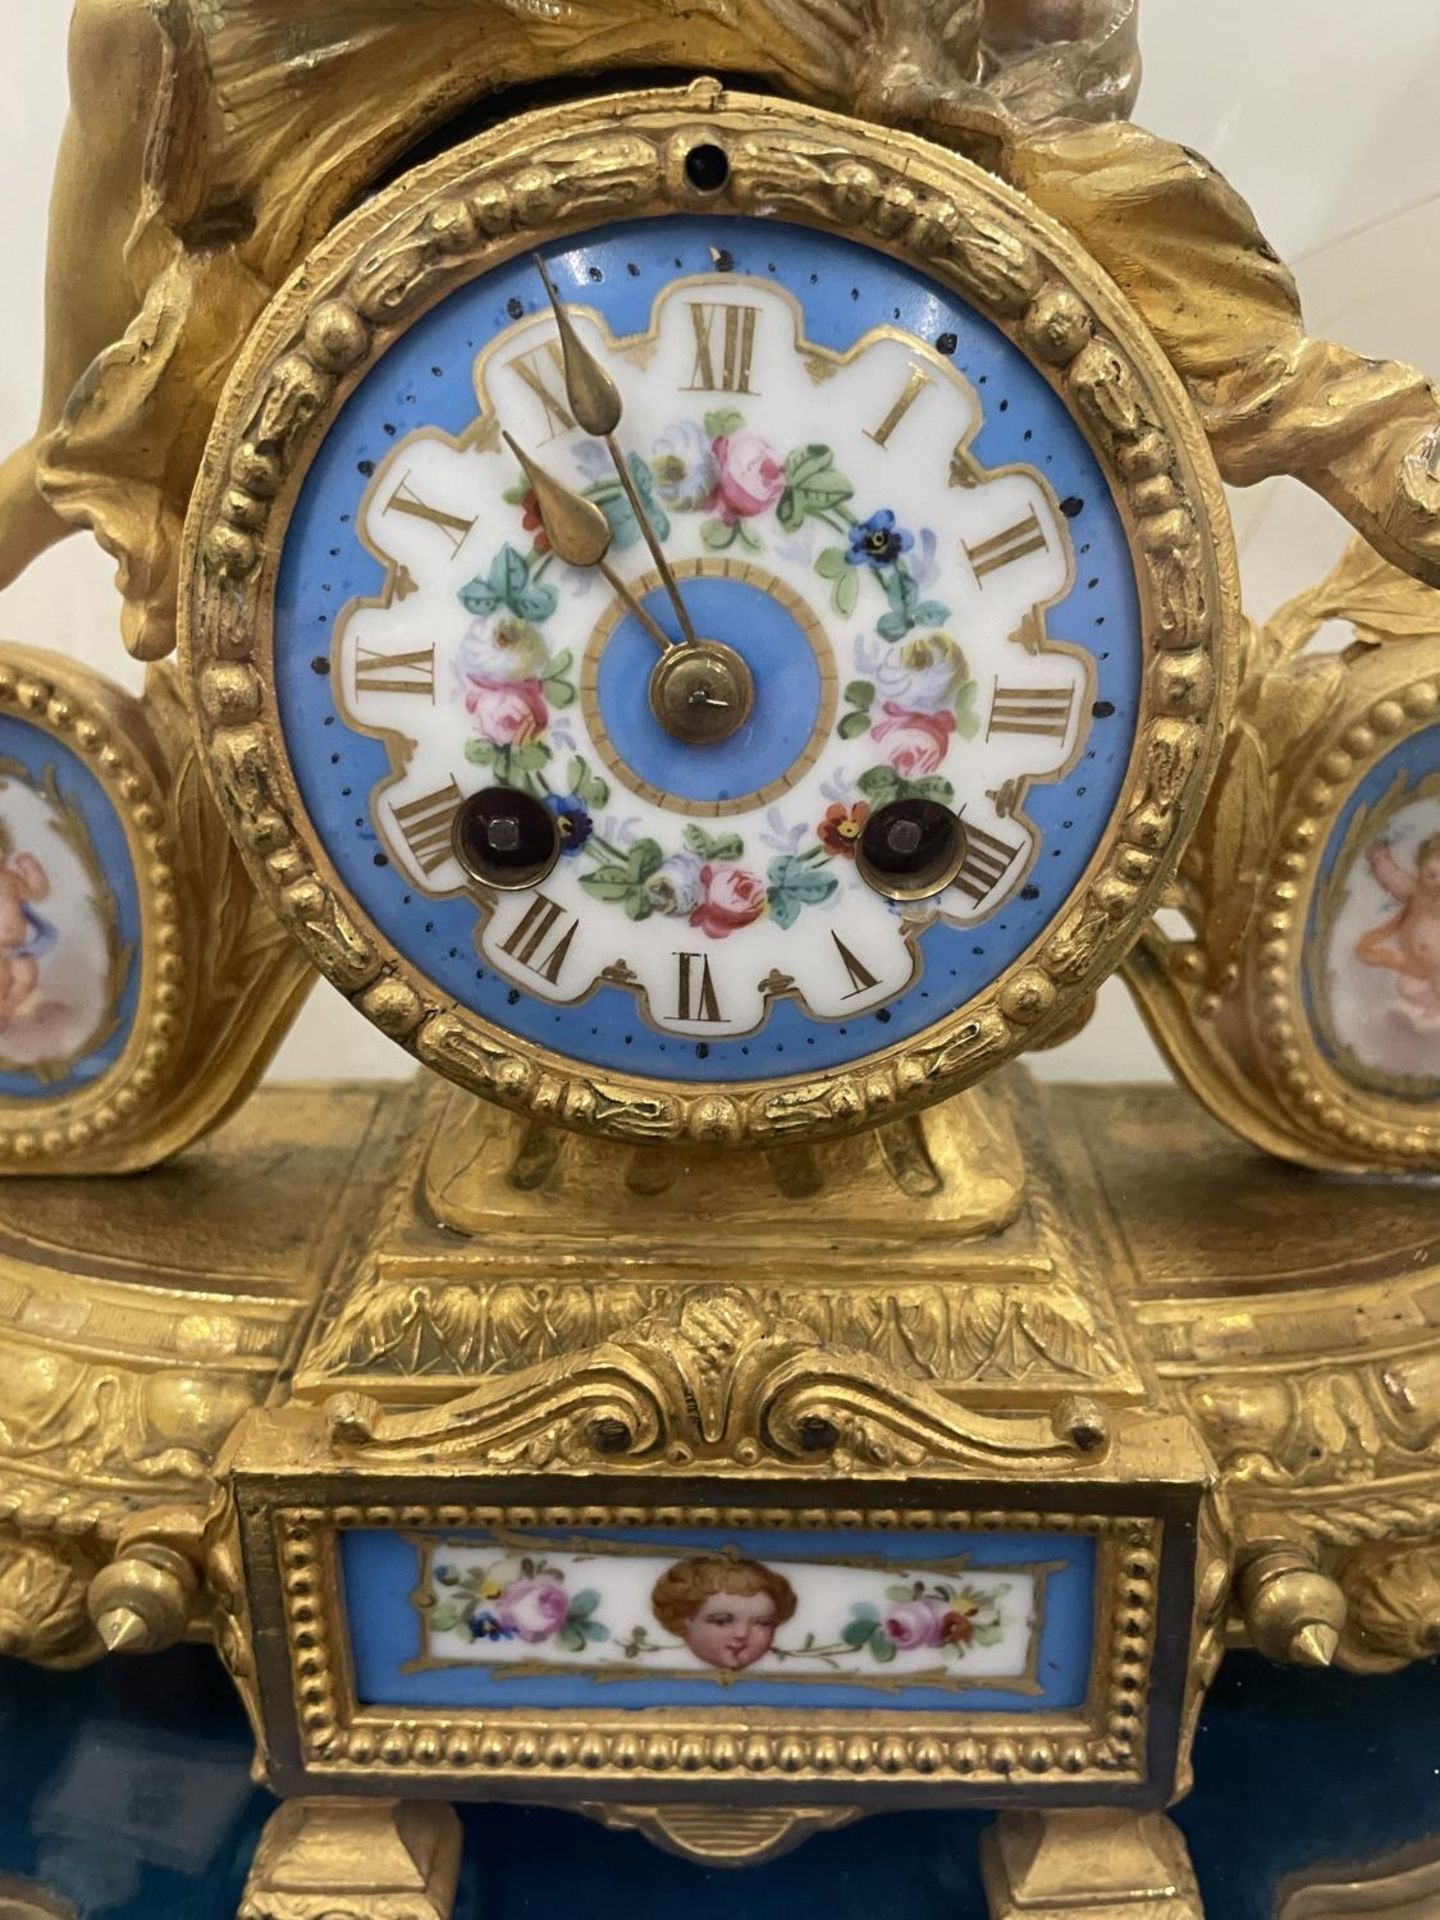 A VINTAGE FRENCH ORMOLU CLOCK WITH DECORATIVE ENAMEL FACE AND PANELS IN A GLASS DOME (A/F) - Image 5 of 10